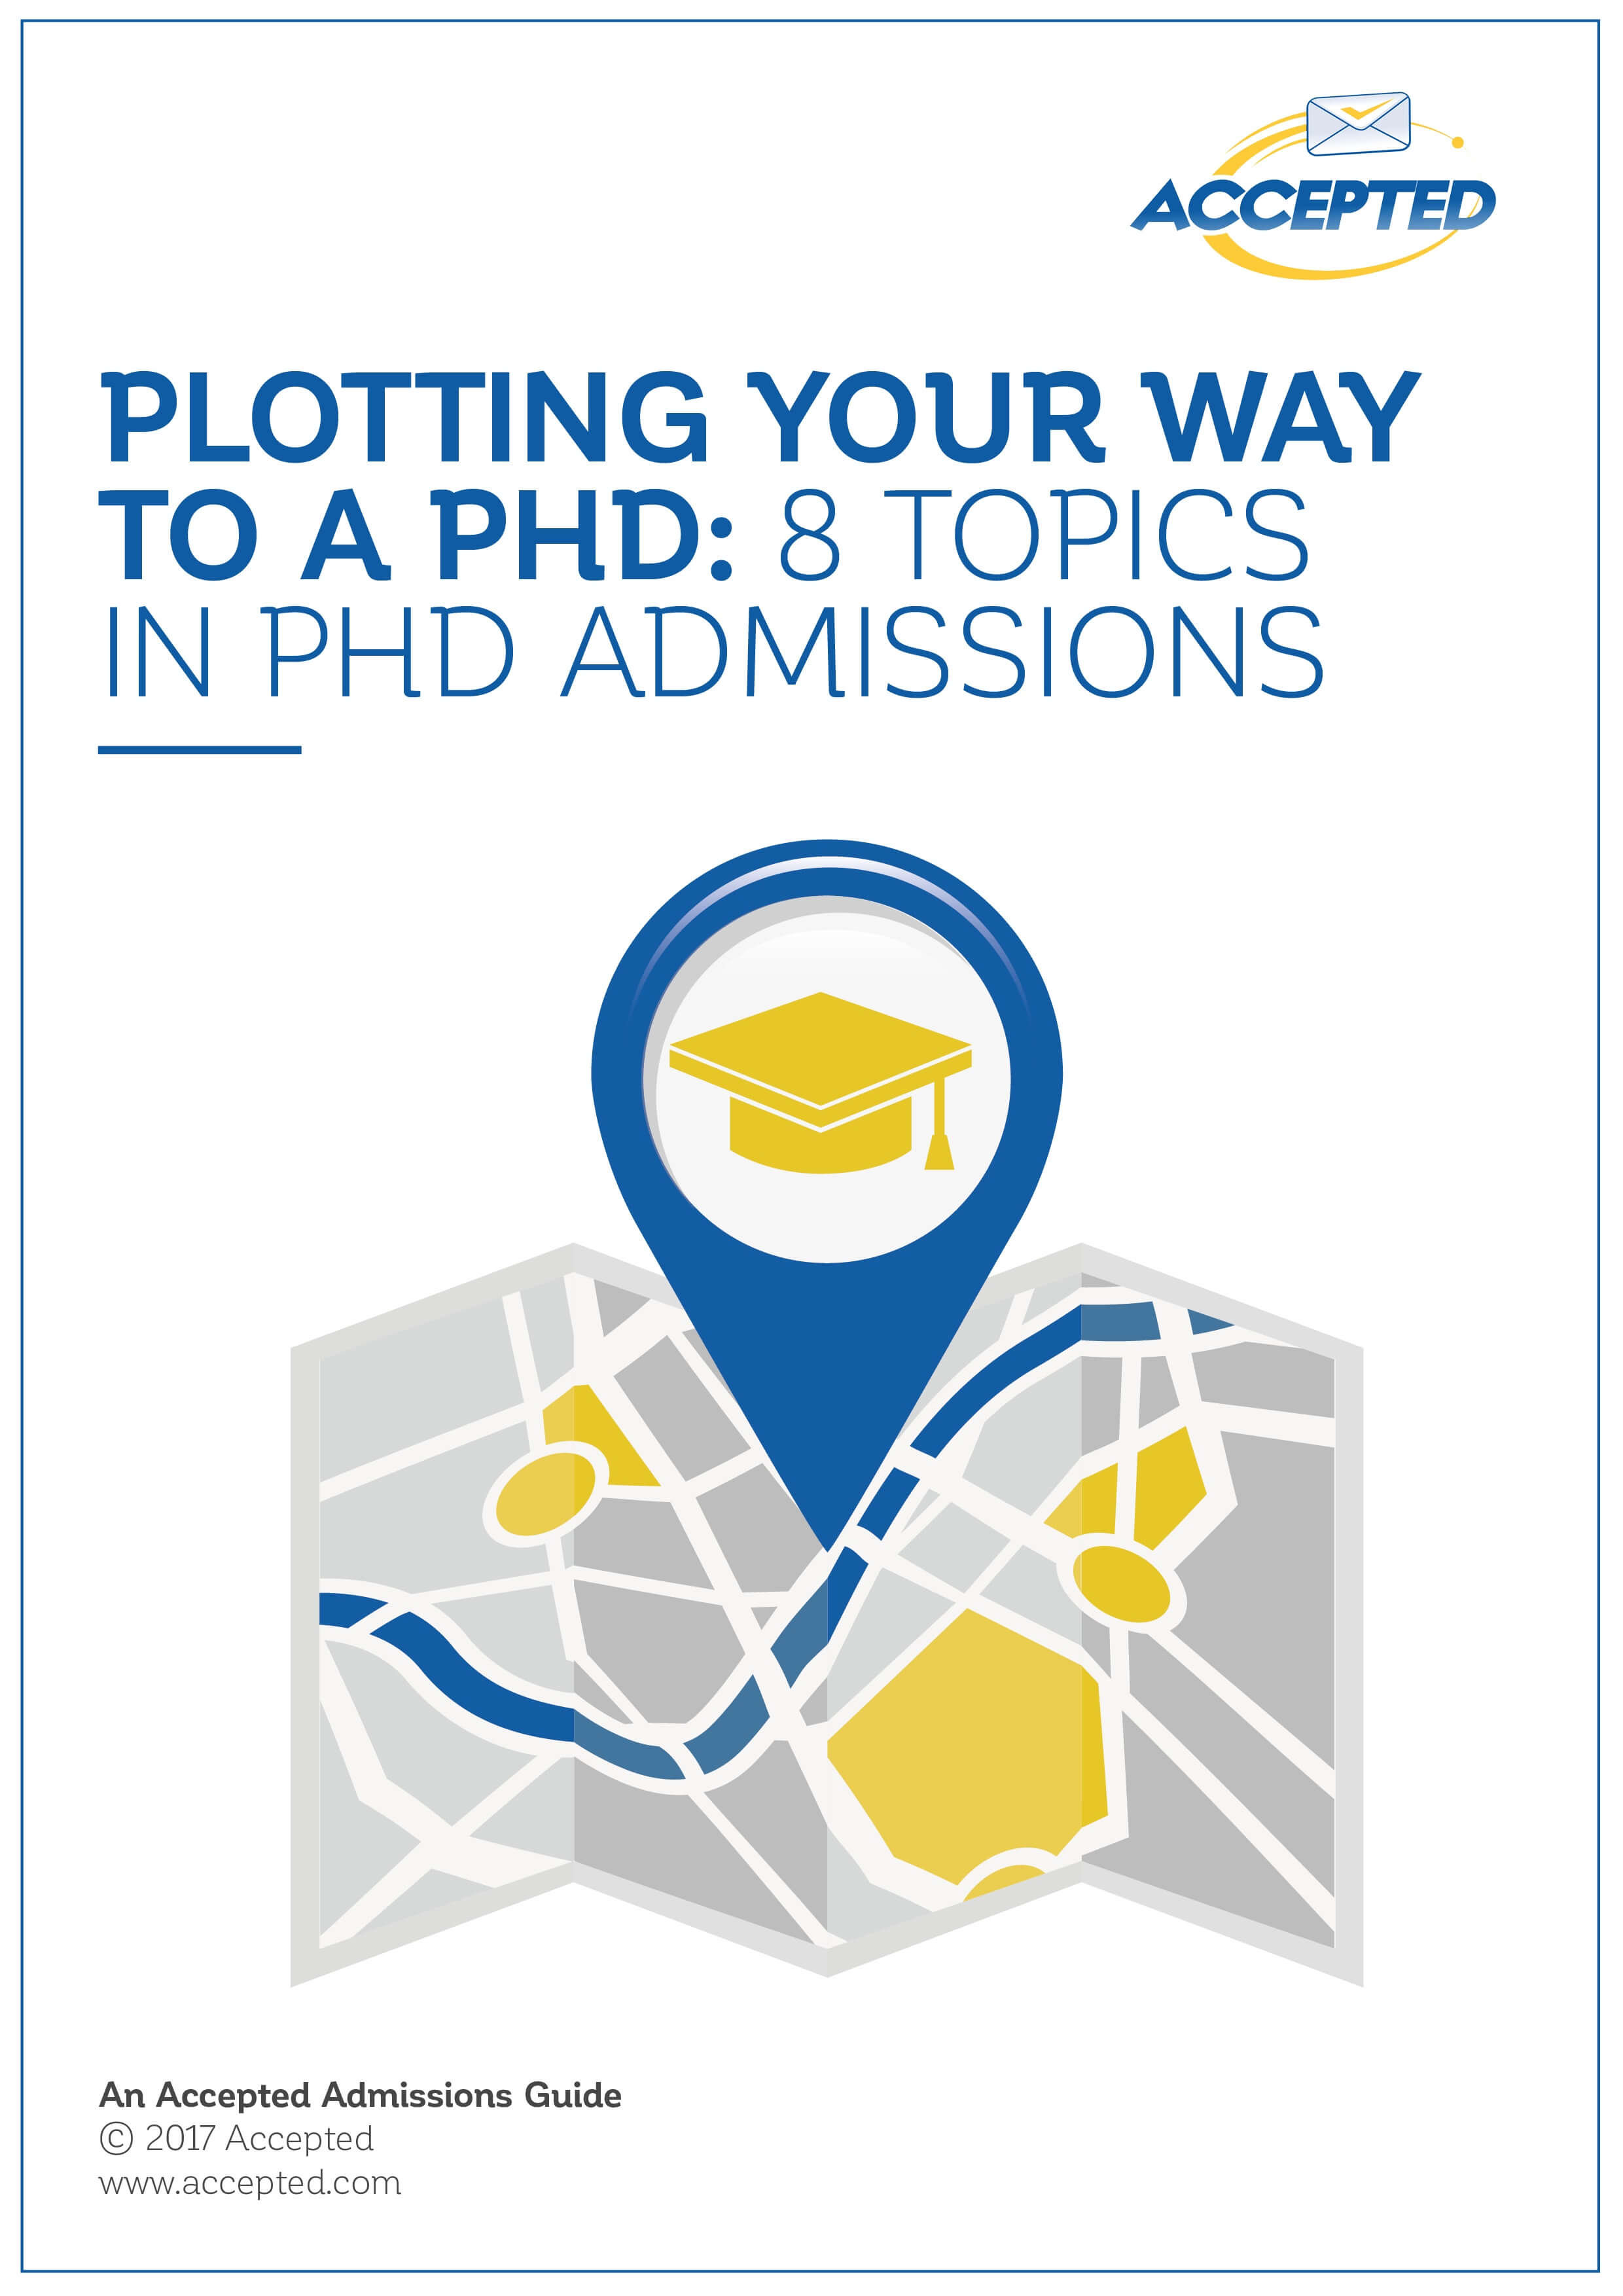 Plotting Your Way to a PhD